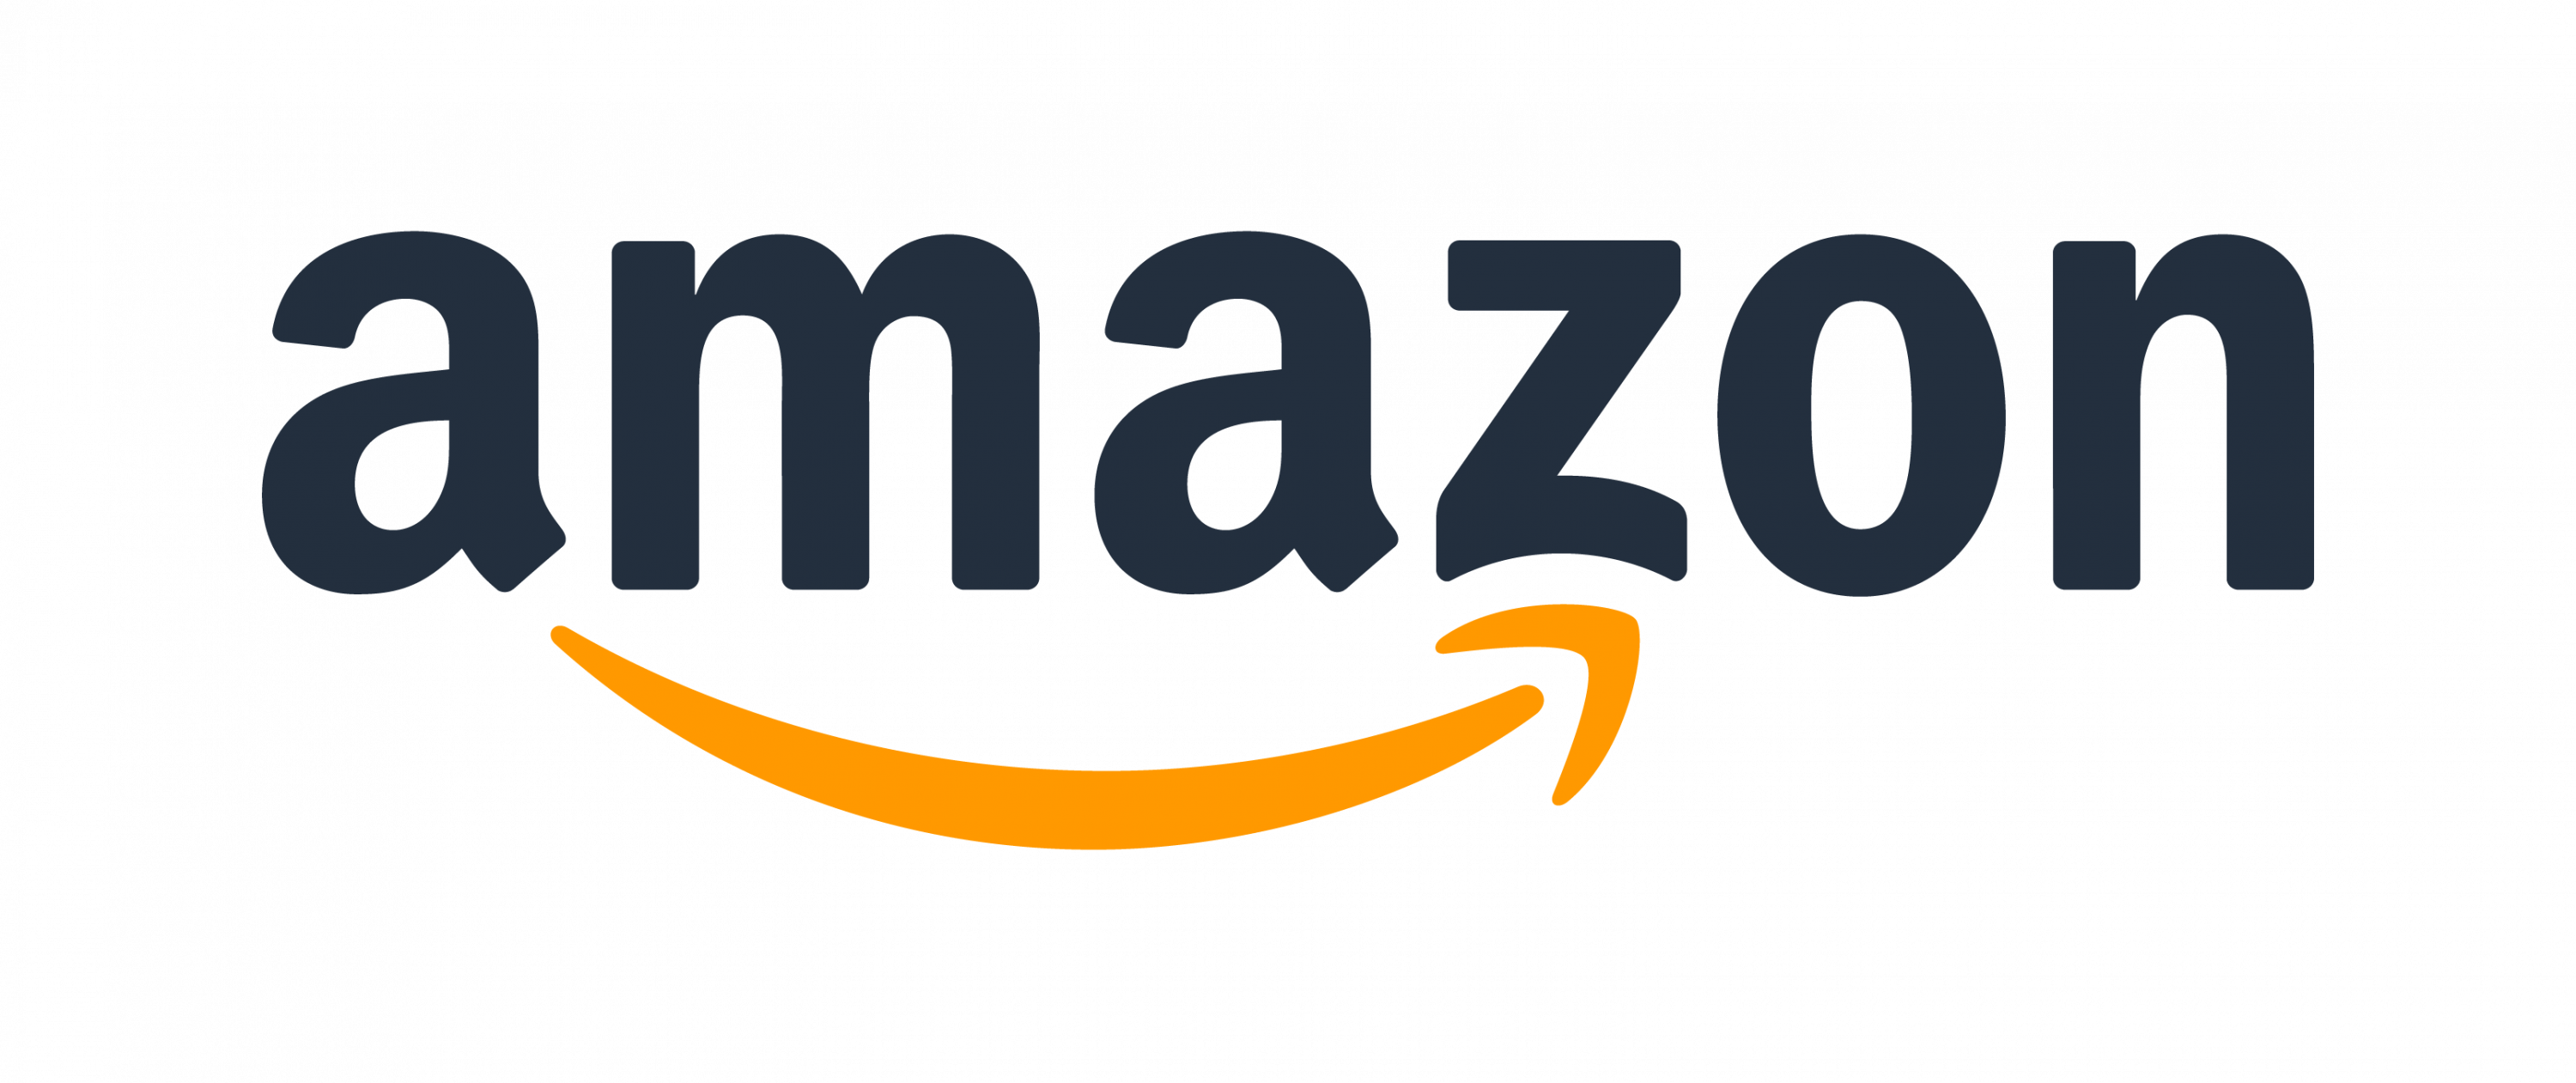 PFLUGERVILLE COMMUNITY DEVELOPMENT CORP. PARTNERS WITH WORKFORCE SOLUTIONS CAPITAL AREA TO HOST AMAZON HIRING INFORMATION WEBINAR Photo